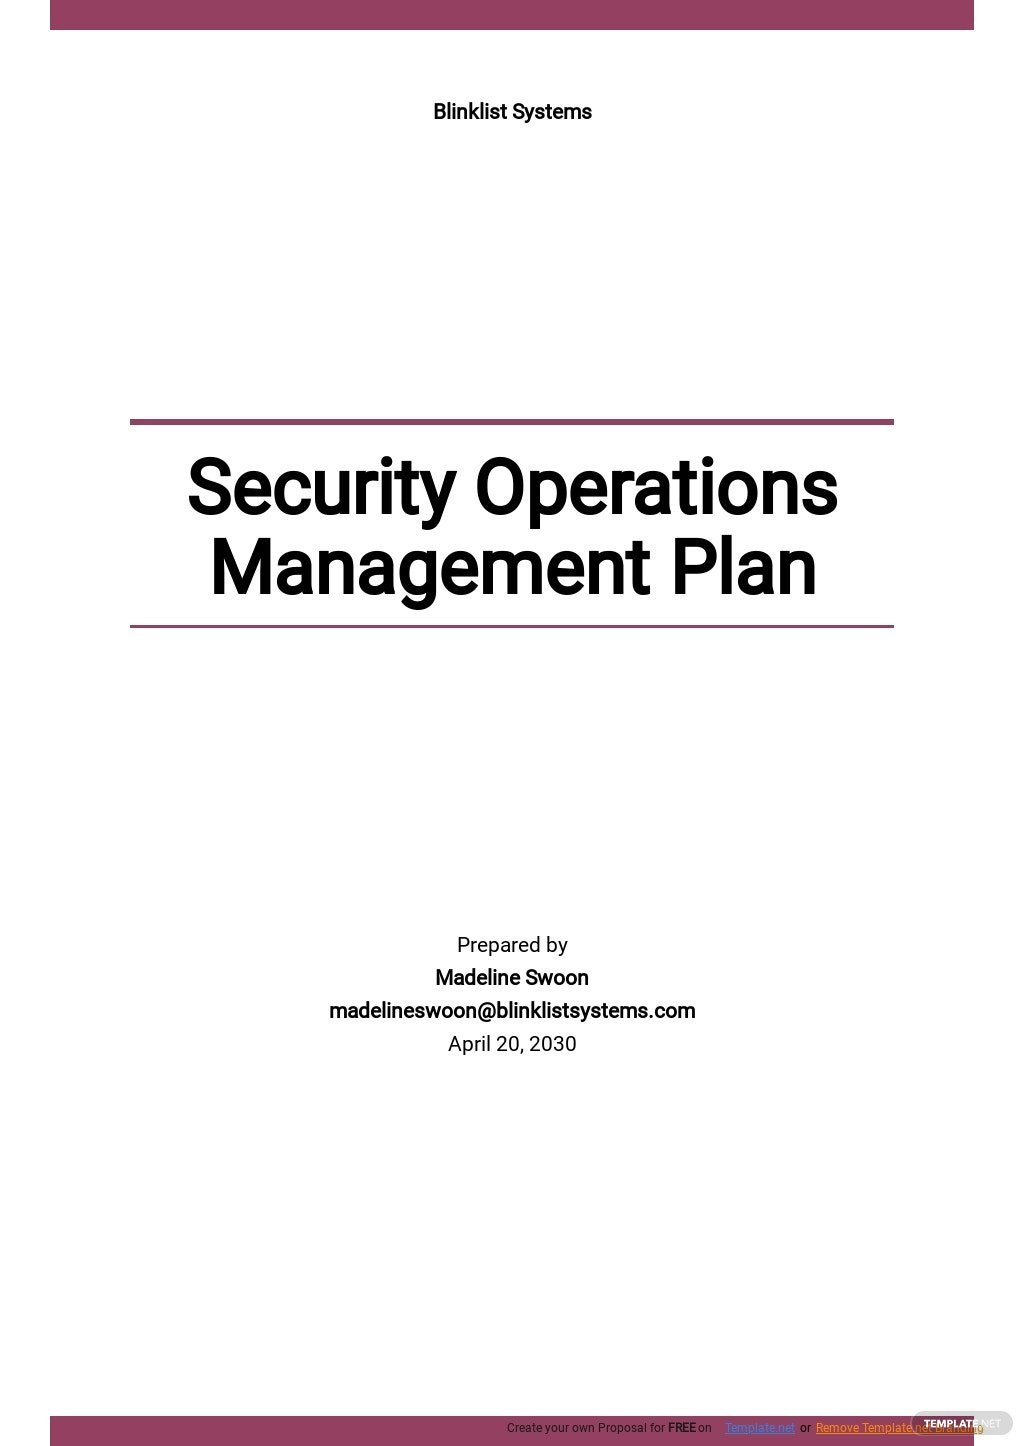 security operations management plan template